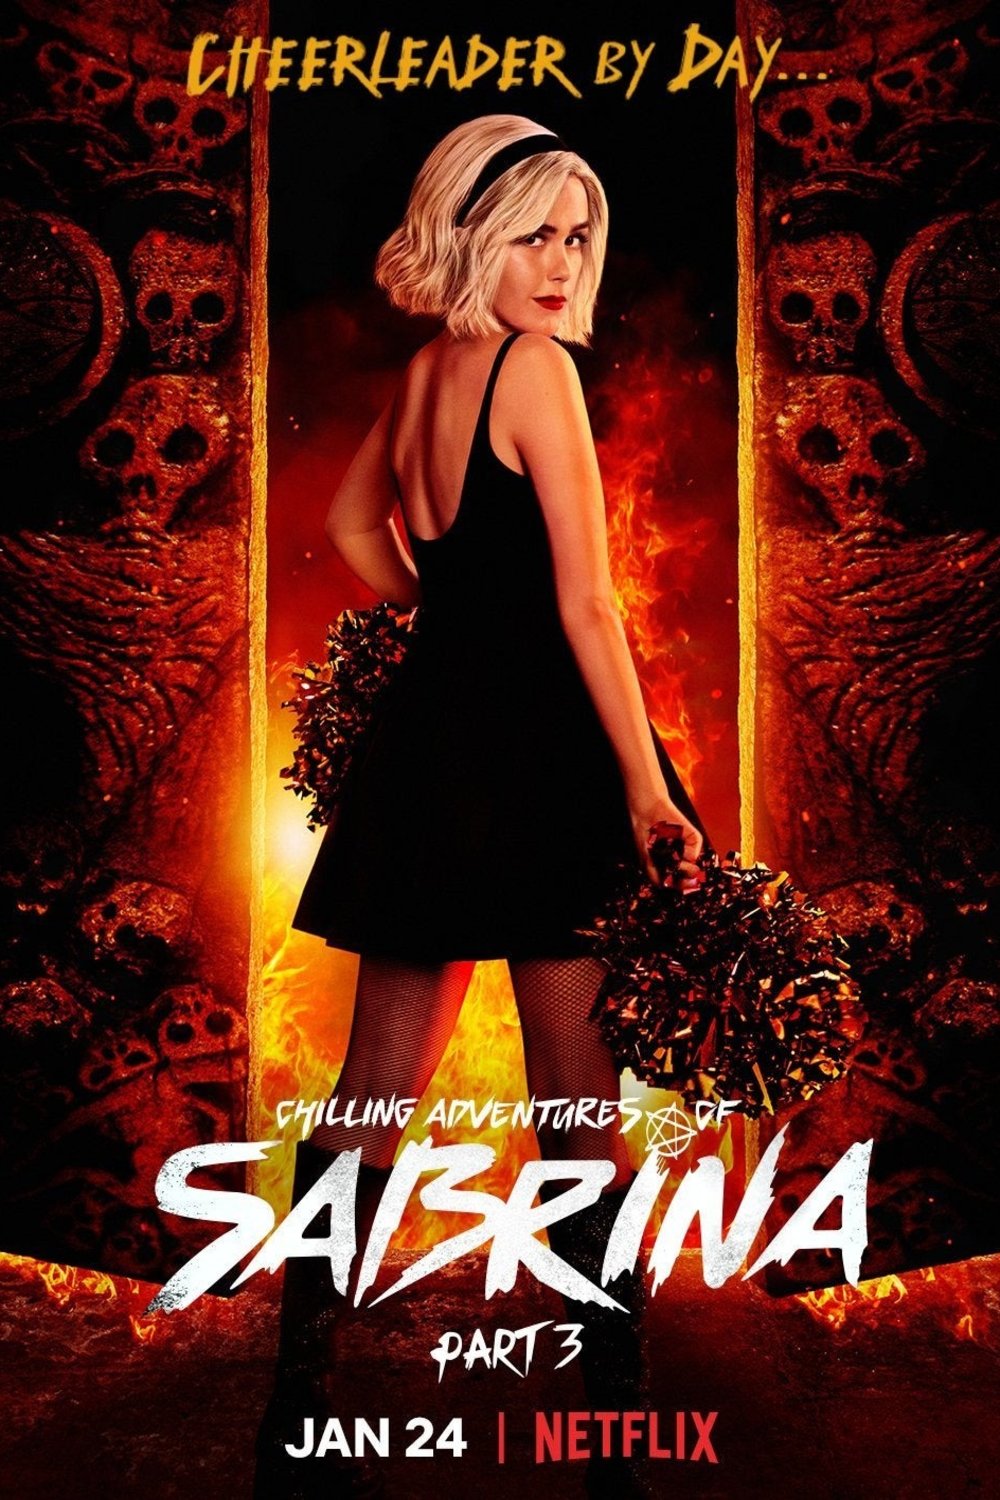 Poster of the movie Chilling Adventures of Sabrina